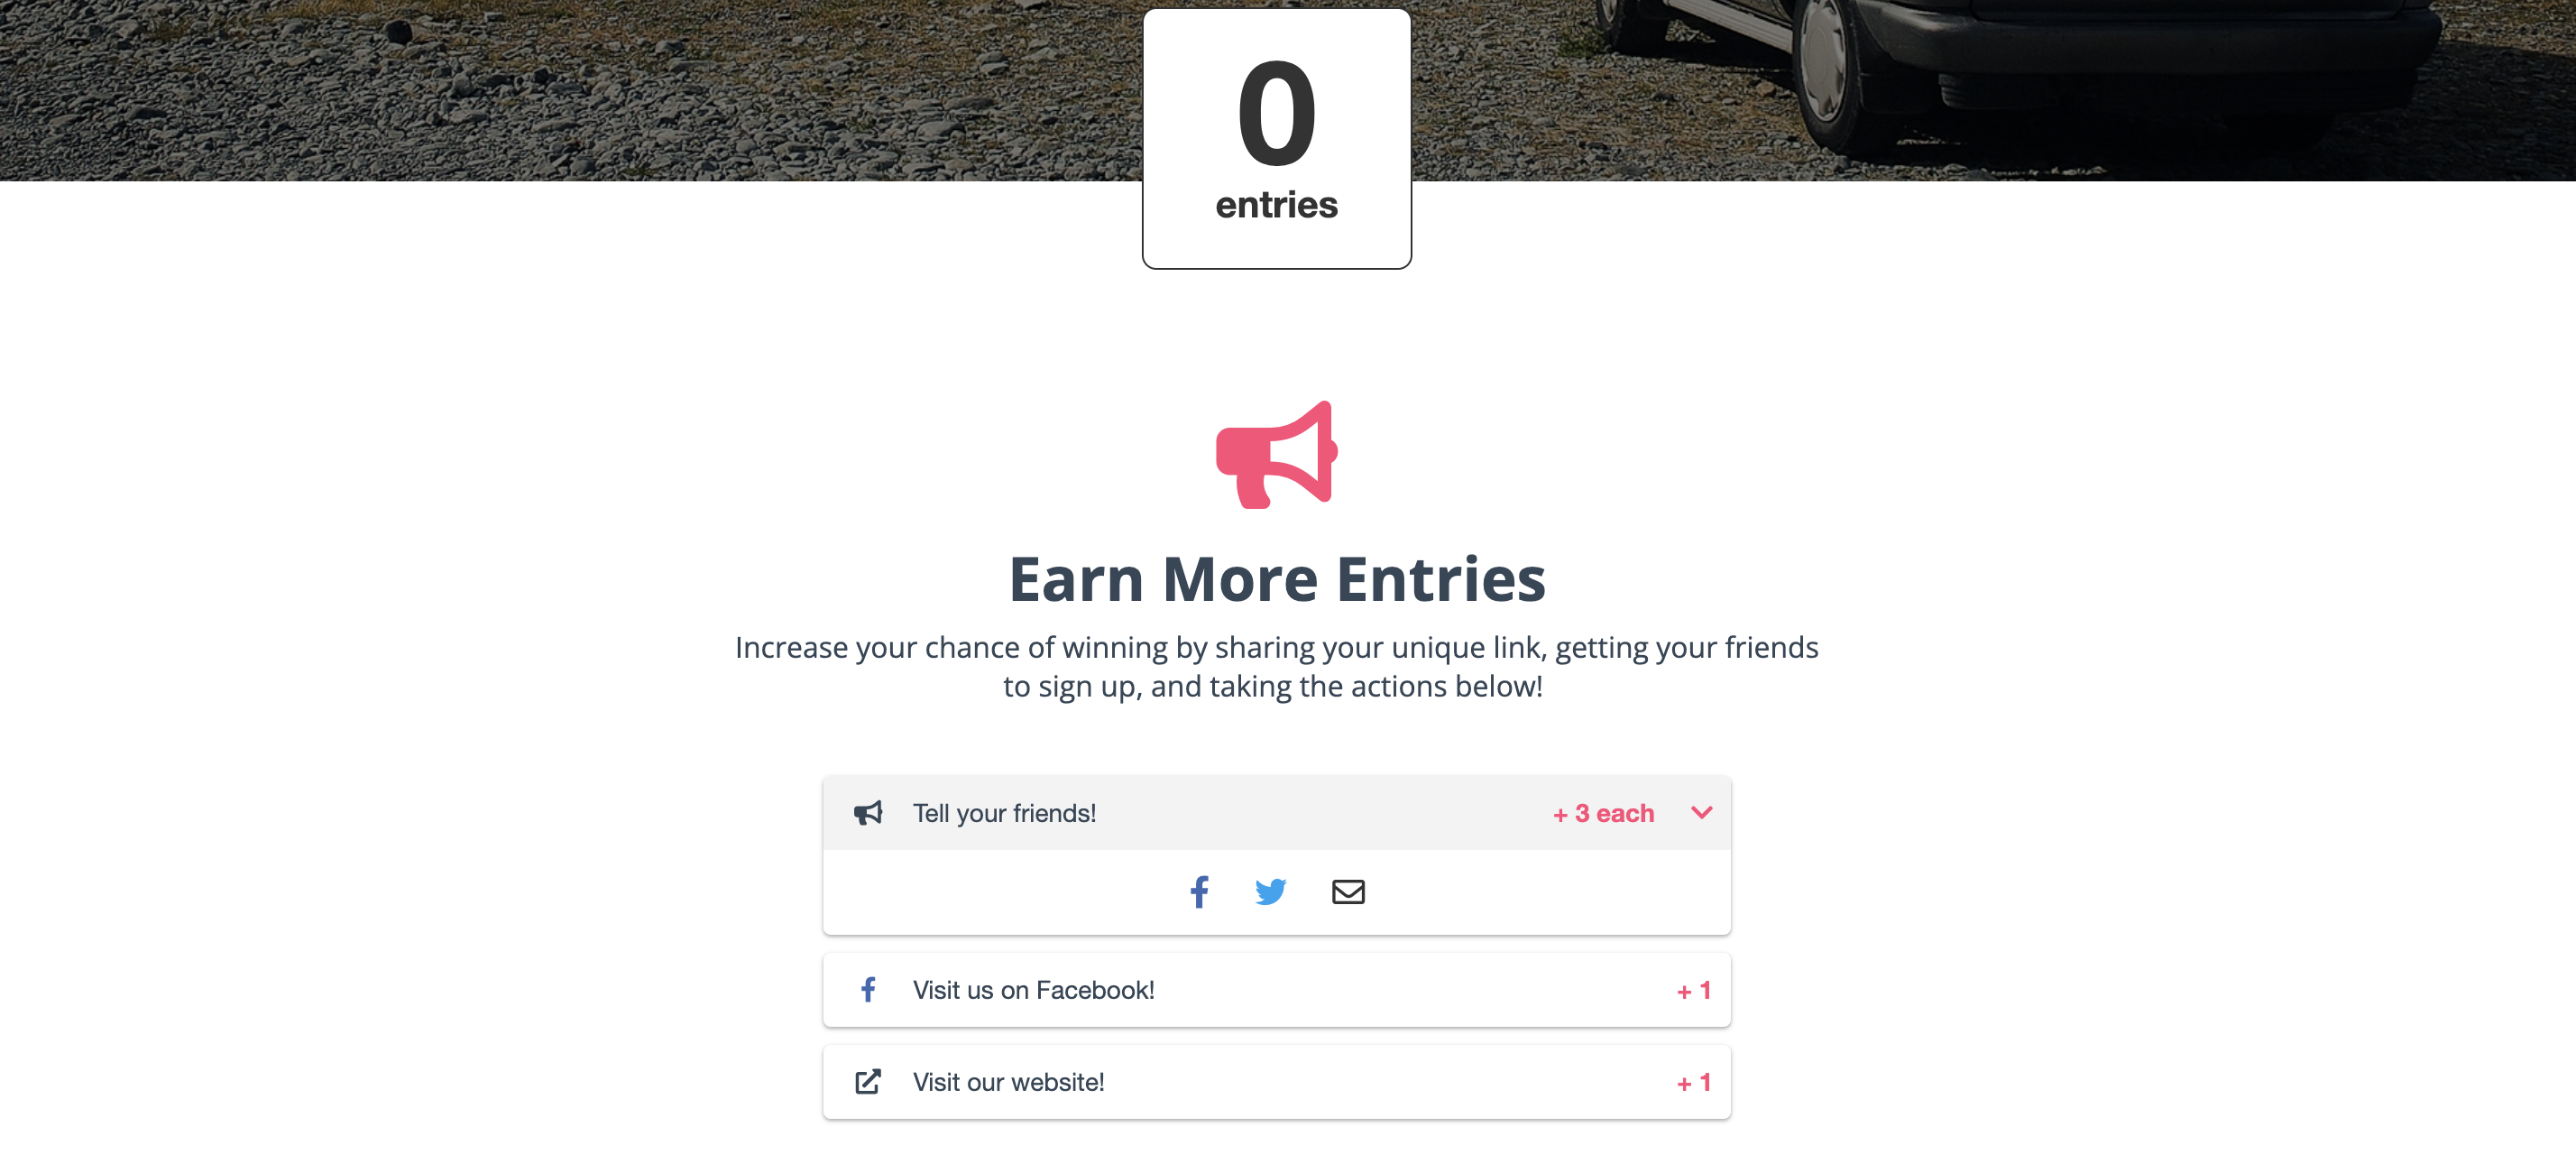 Actions to earn more entries